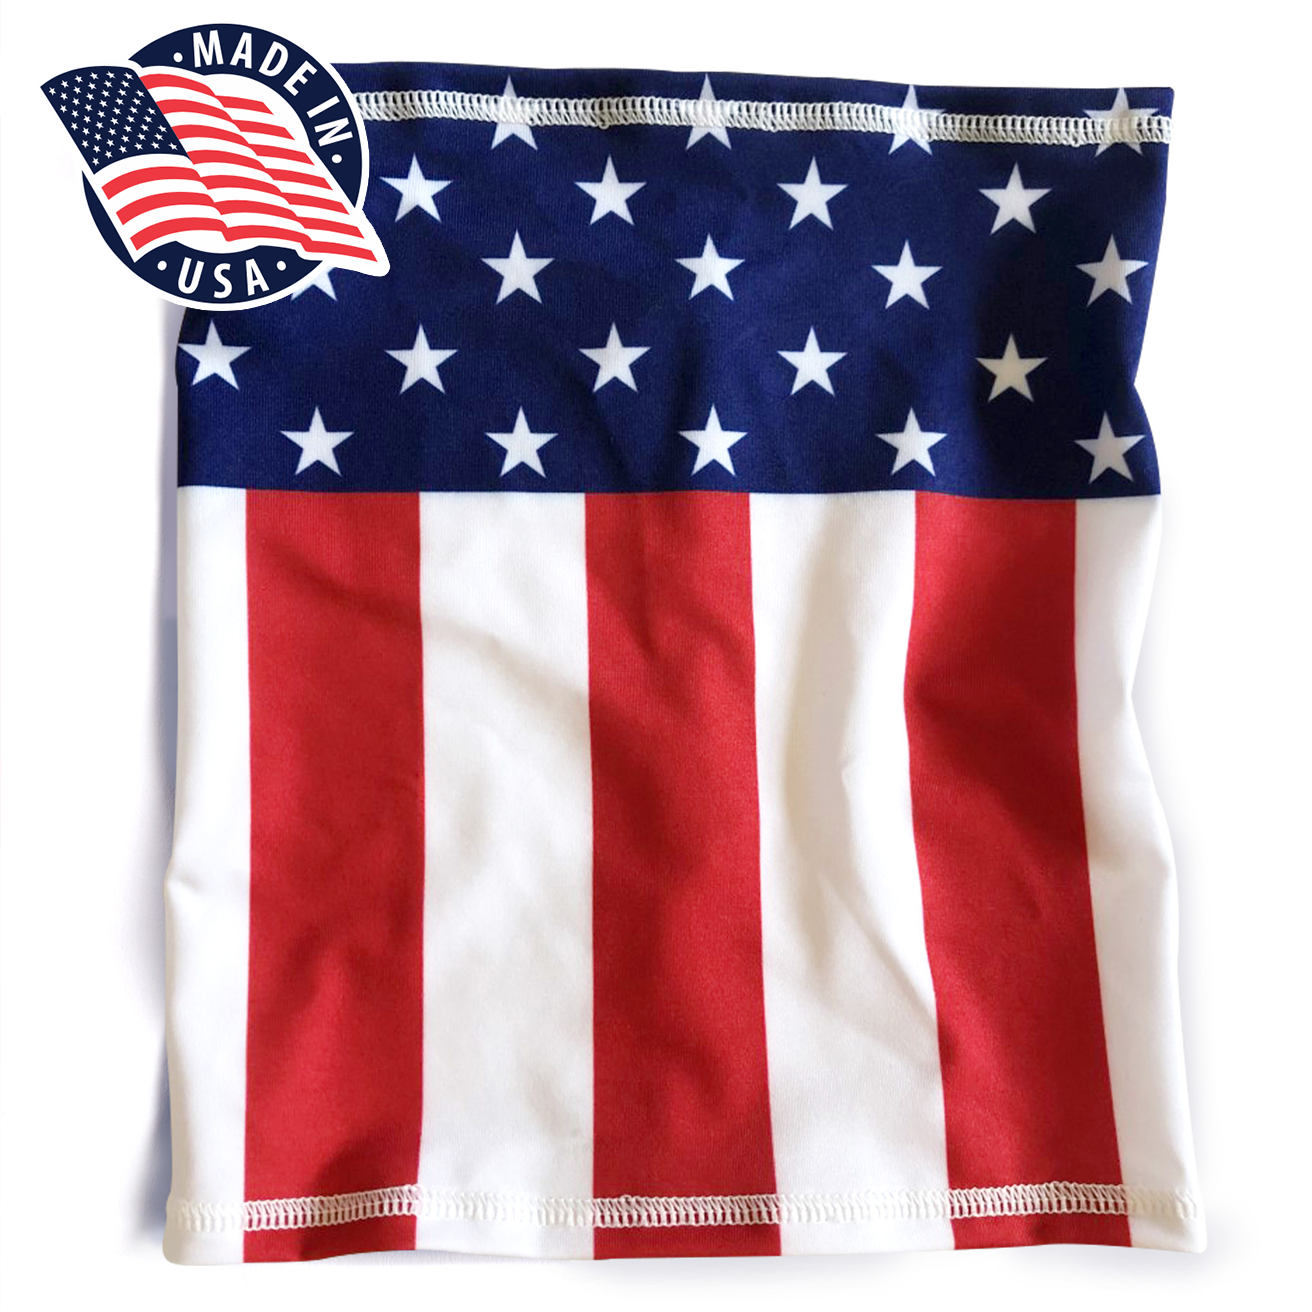 Cooling Compact 6-in-1 Neck Gaiter Neck Gaiters MISSION One Size USA Flag 